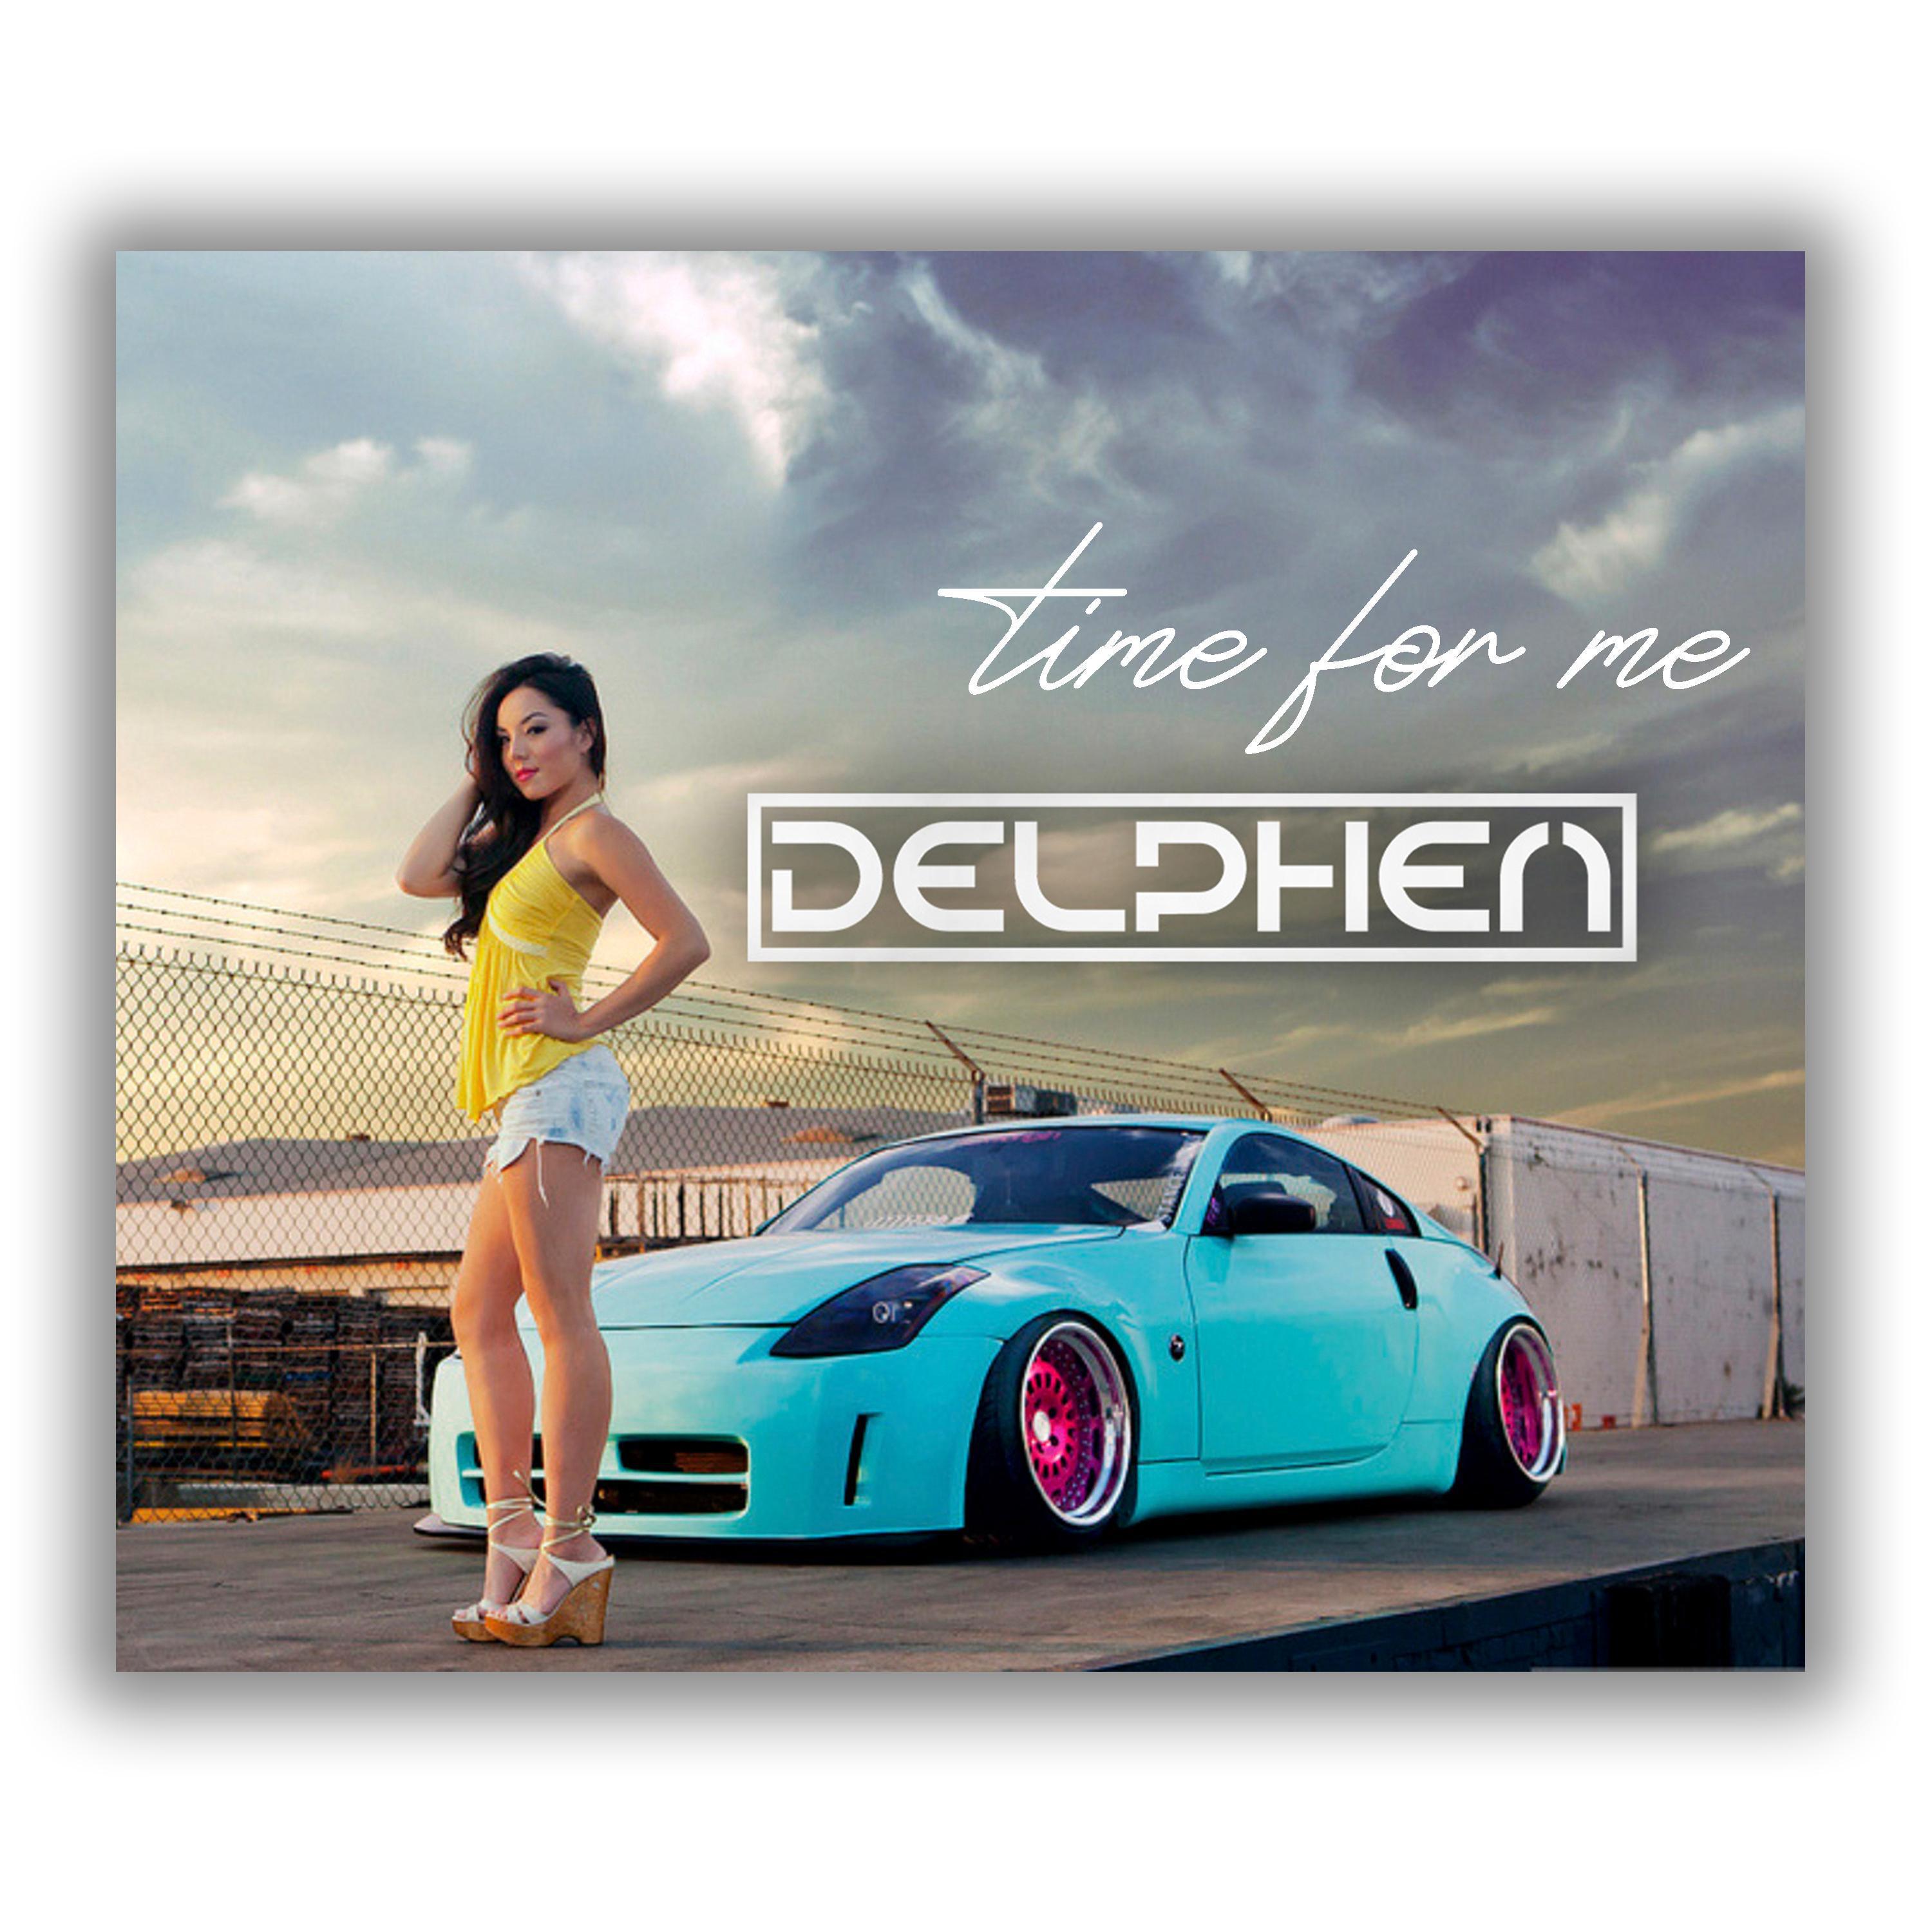 Delphen - Time For Me